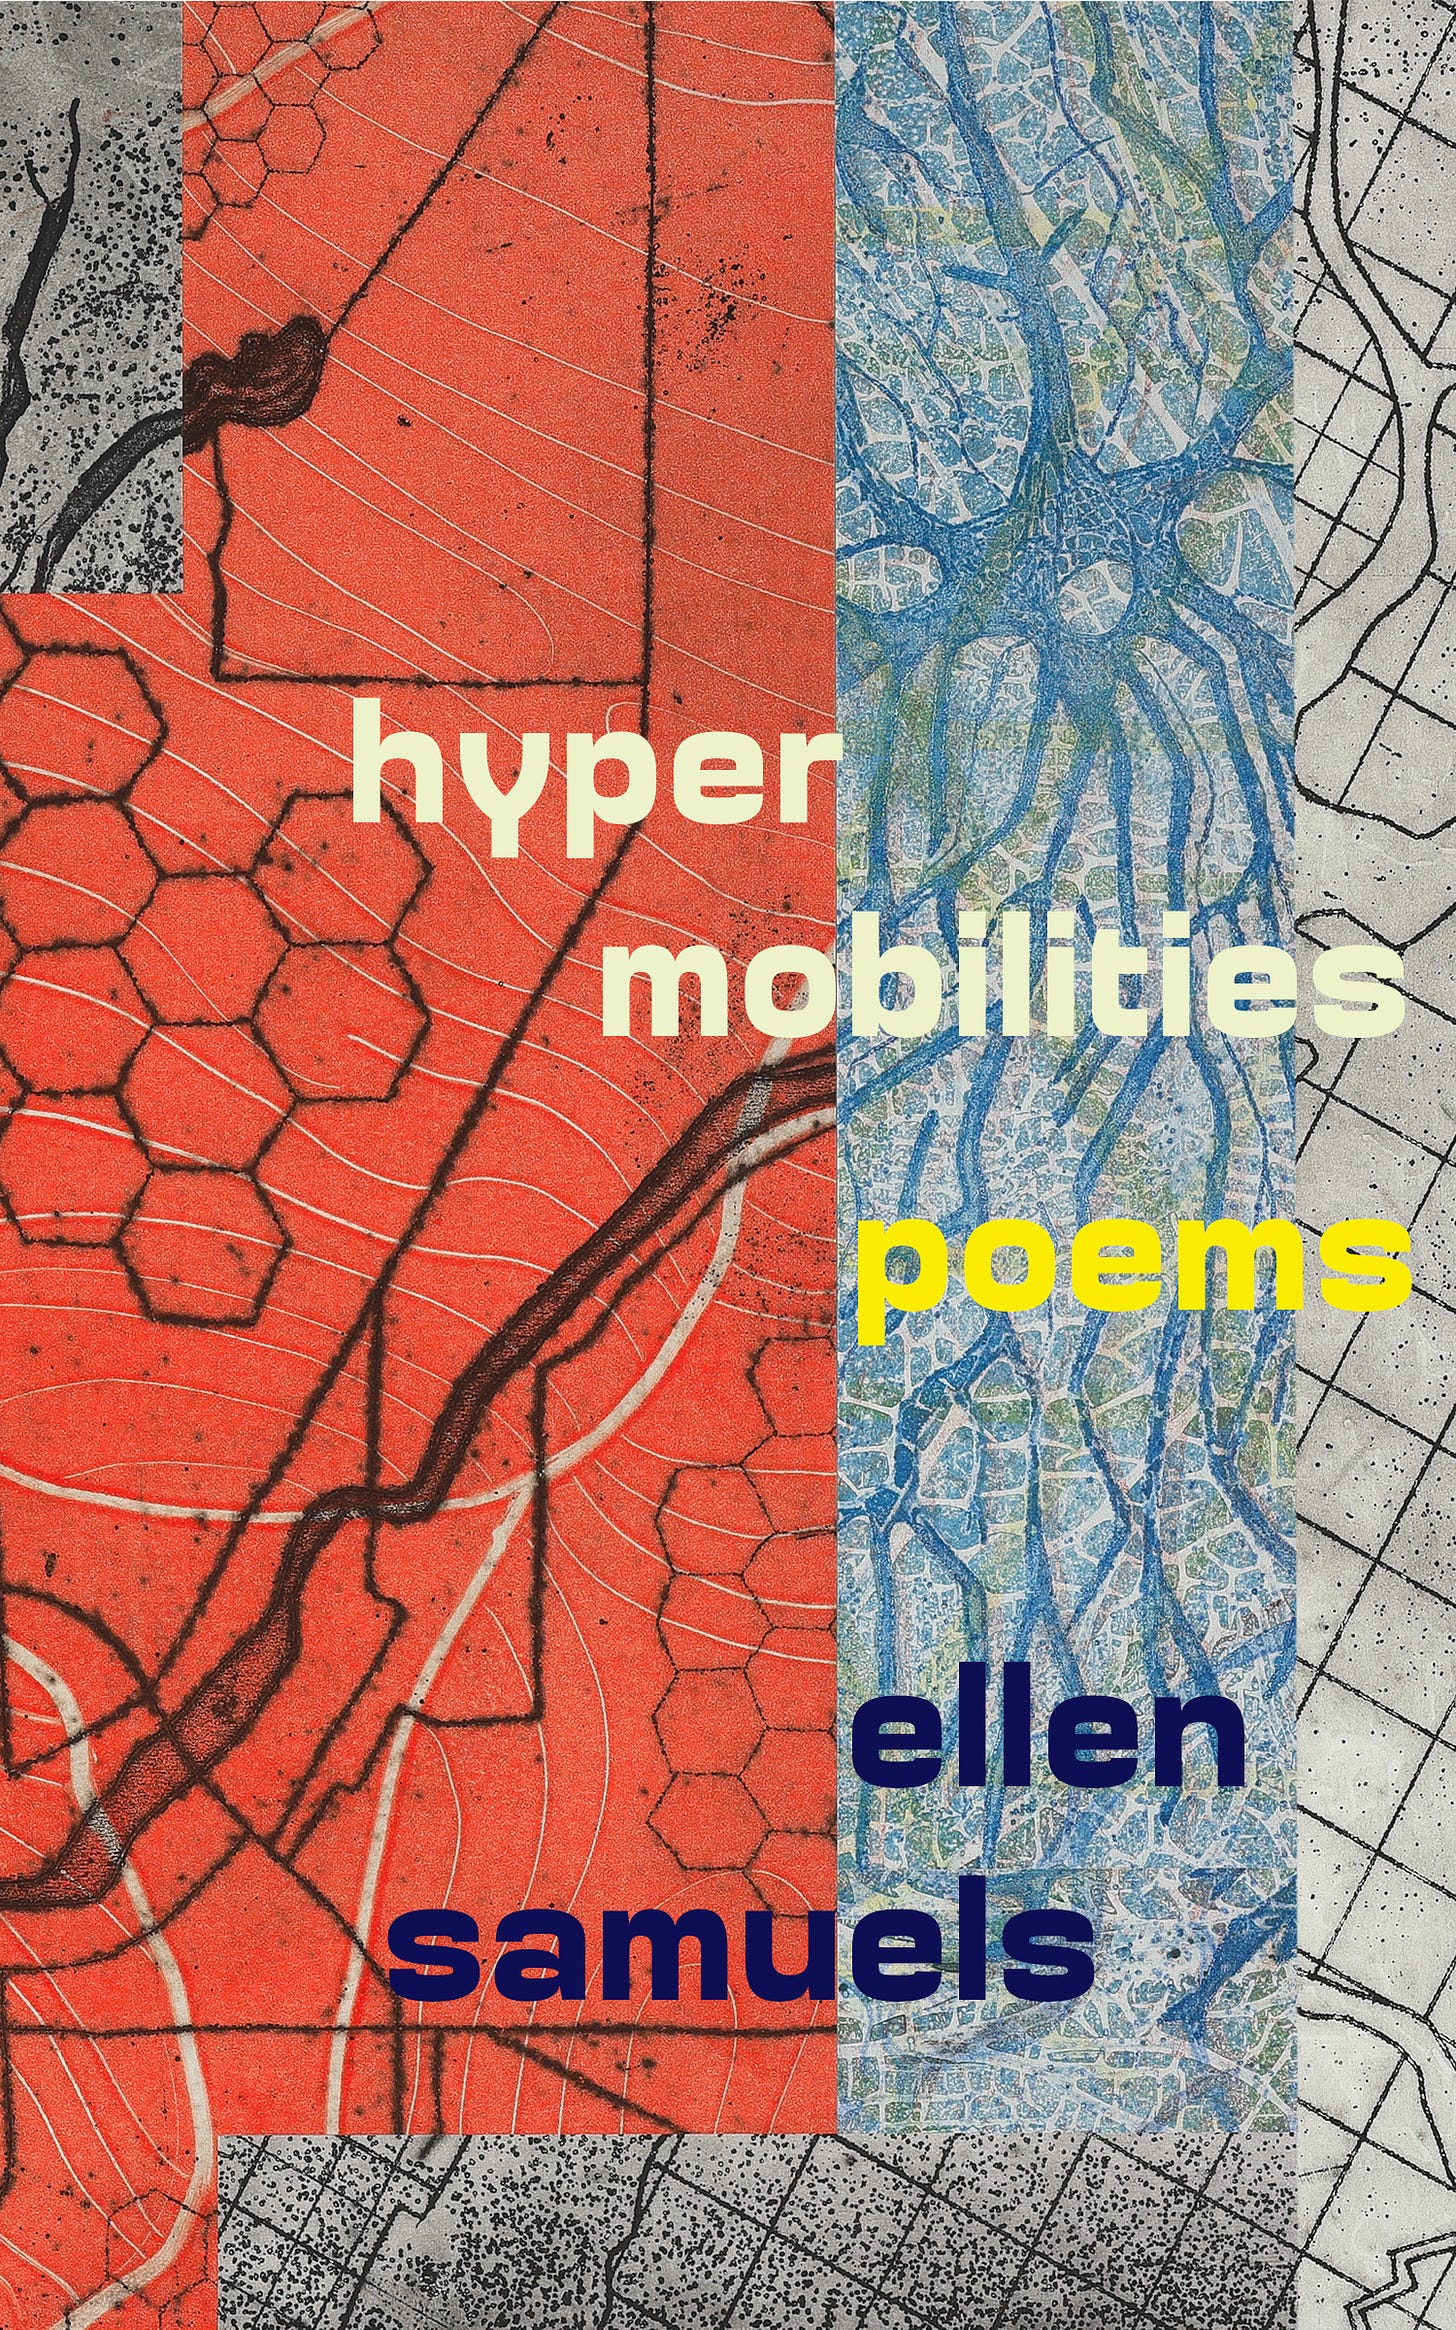 The title, Hypermobilities, and author’s name, Ellen Samuels, appear against a background of abstract art in shades of orange-red, light blue, and light gray, drawing on imagery of neurons, seaweed, and maps.